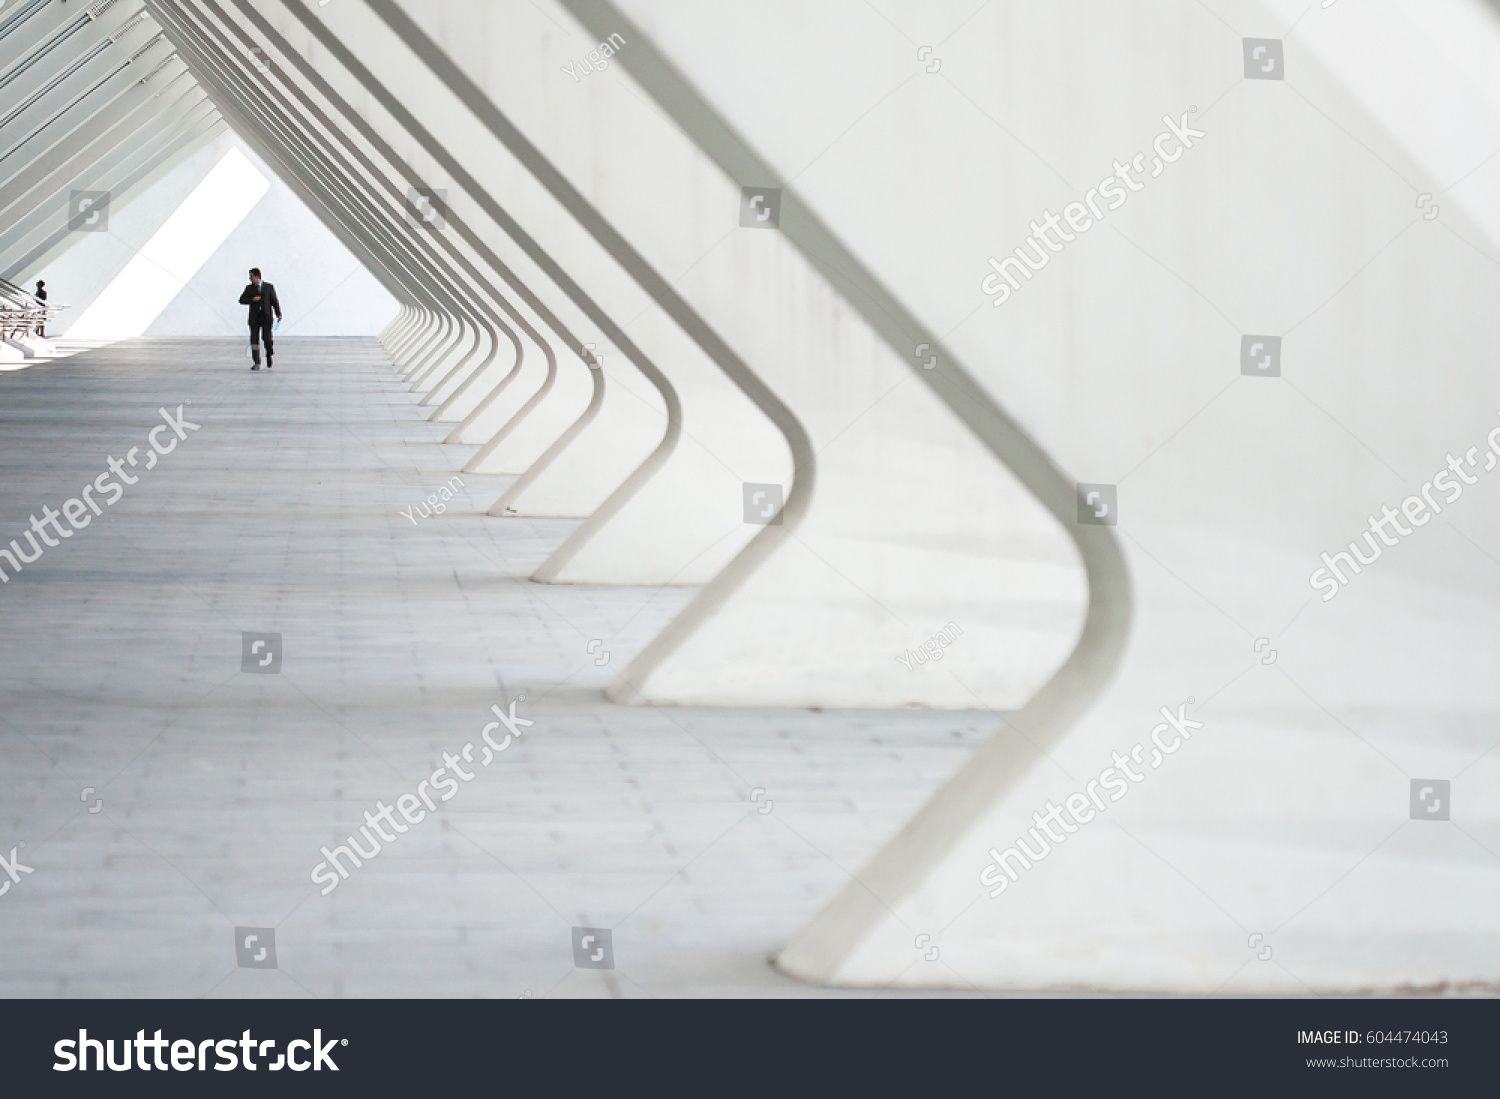 People in the architectural perspective. The sloping lines of the architecture. The man in the suit comes in a bright corridor in a modern building #604474043